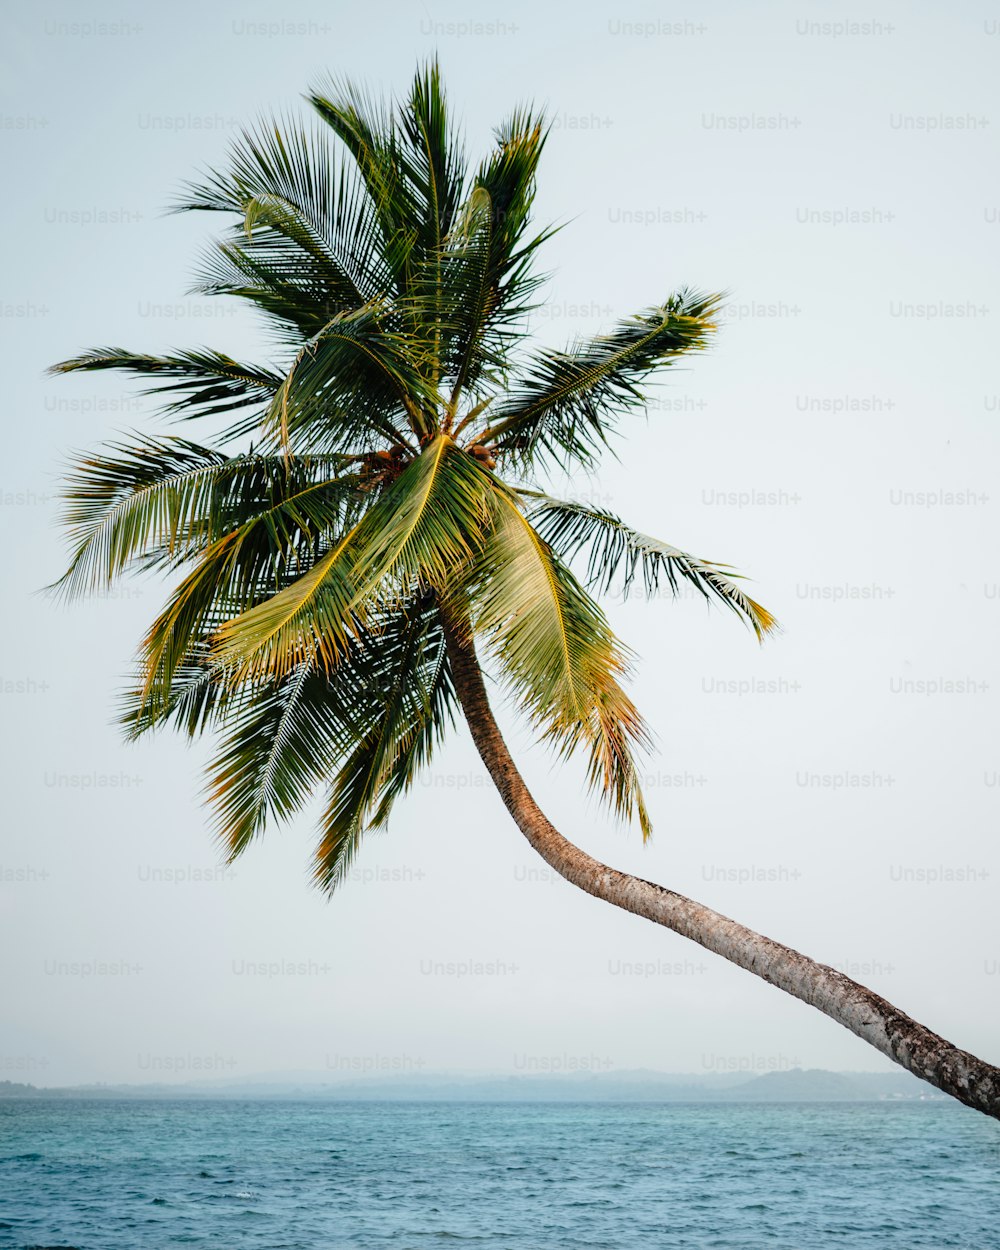 a palm tree leaning over a body of water